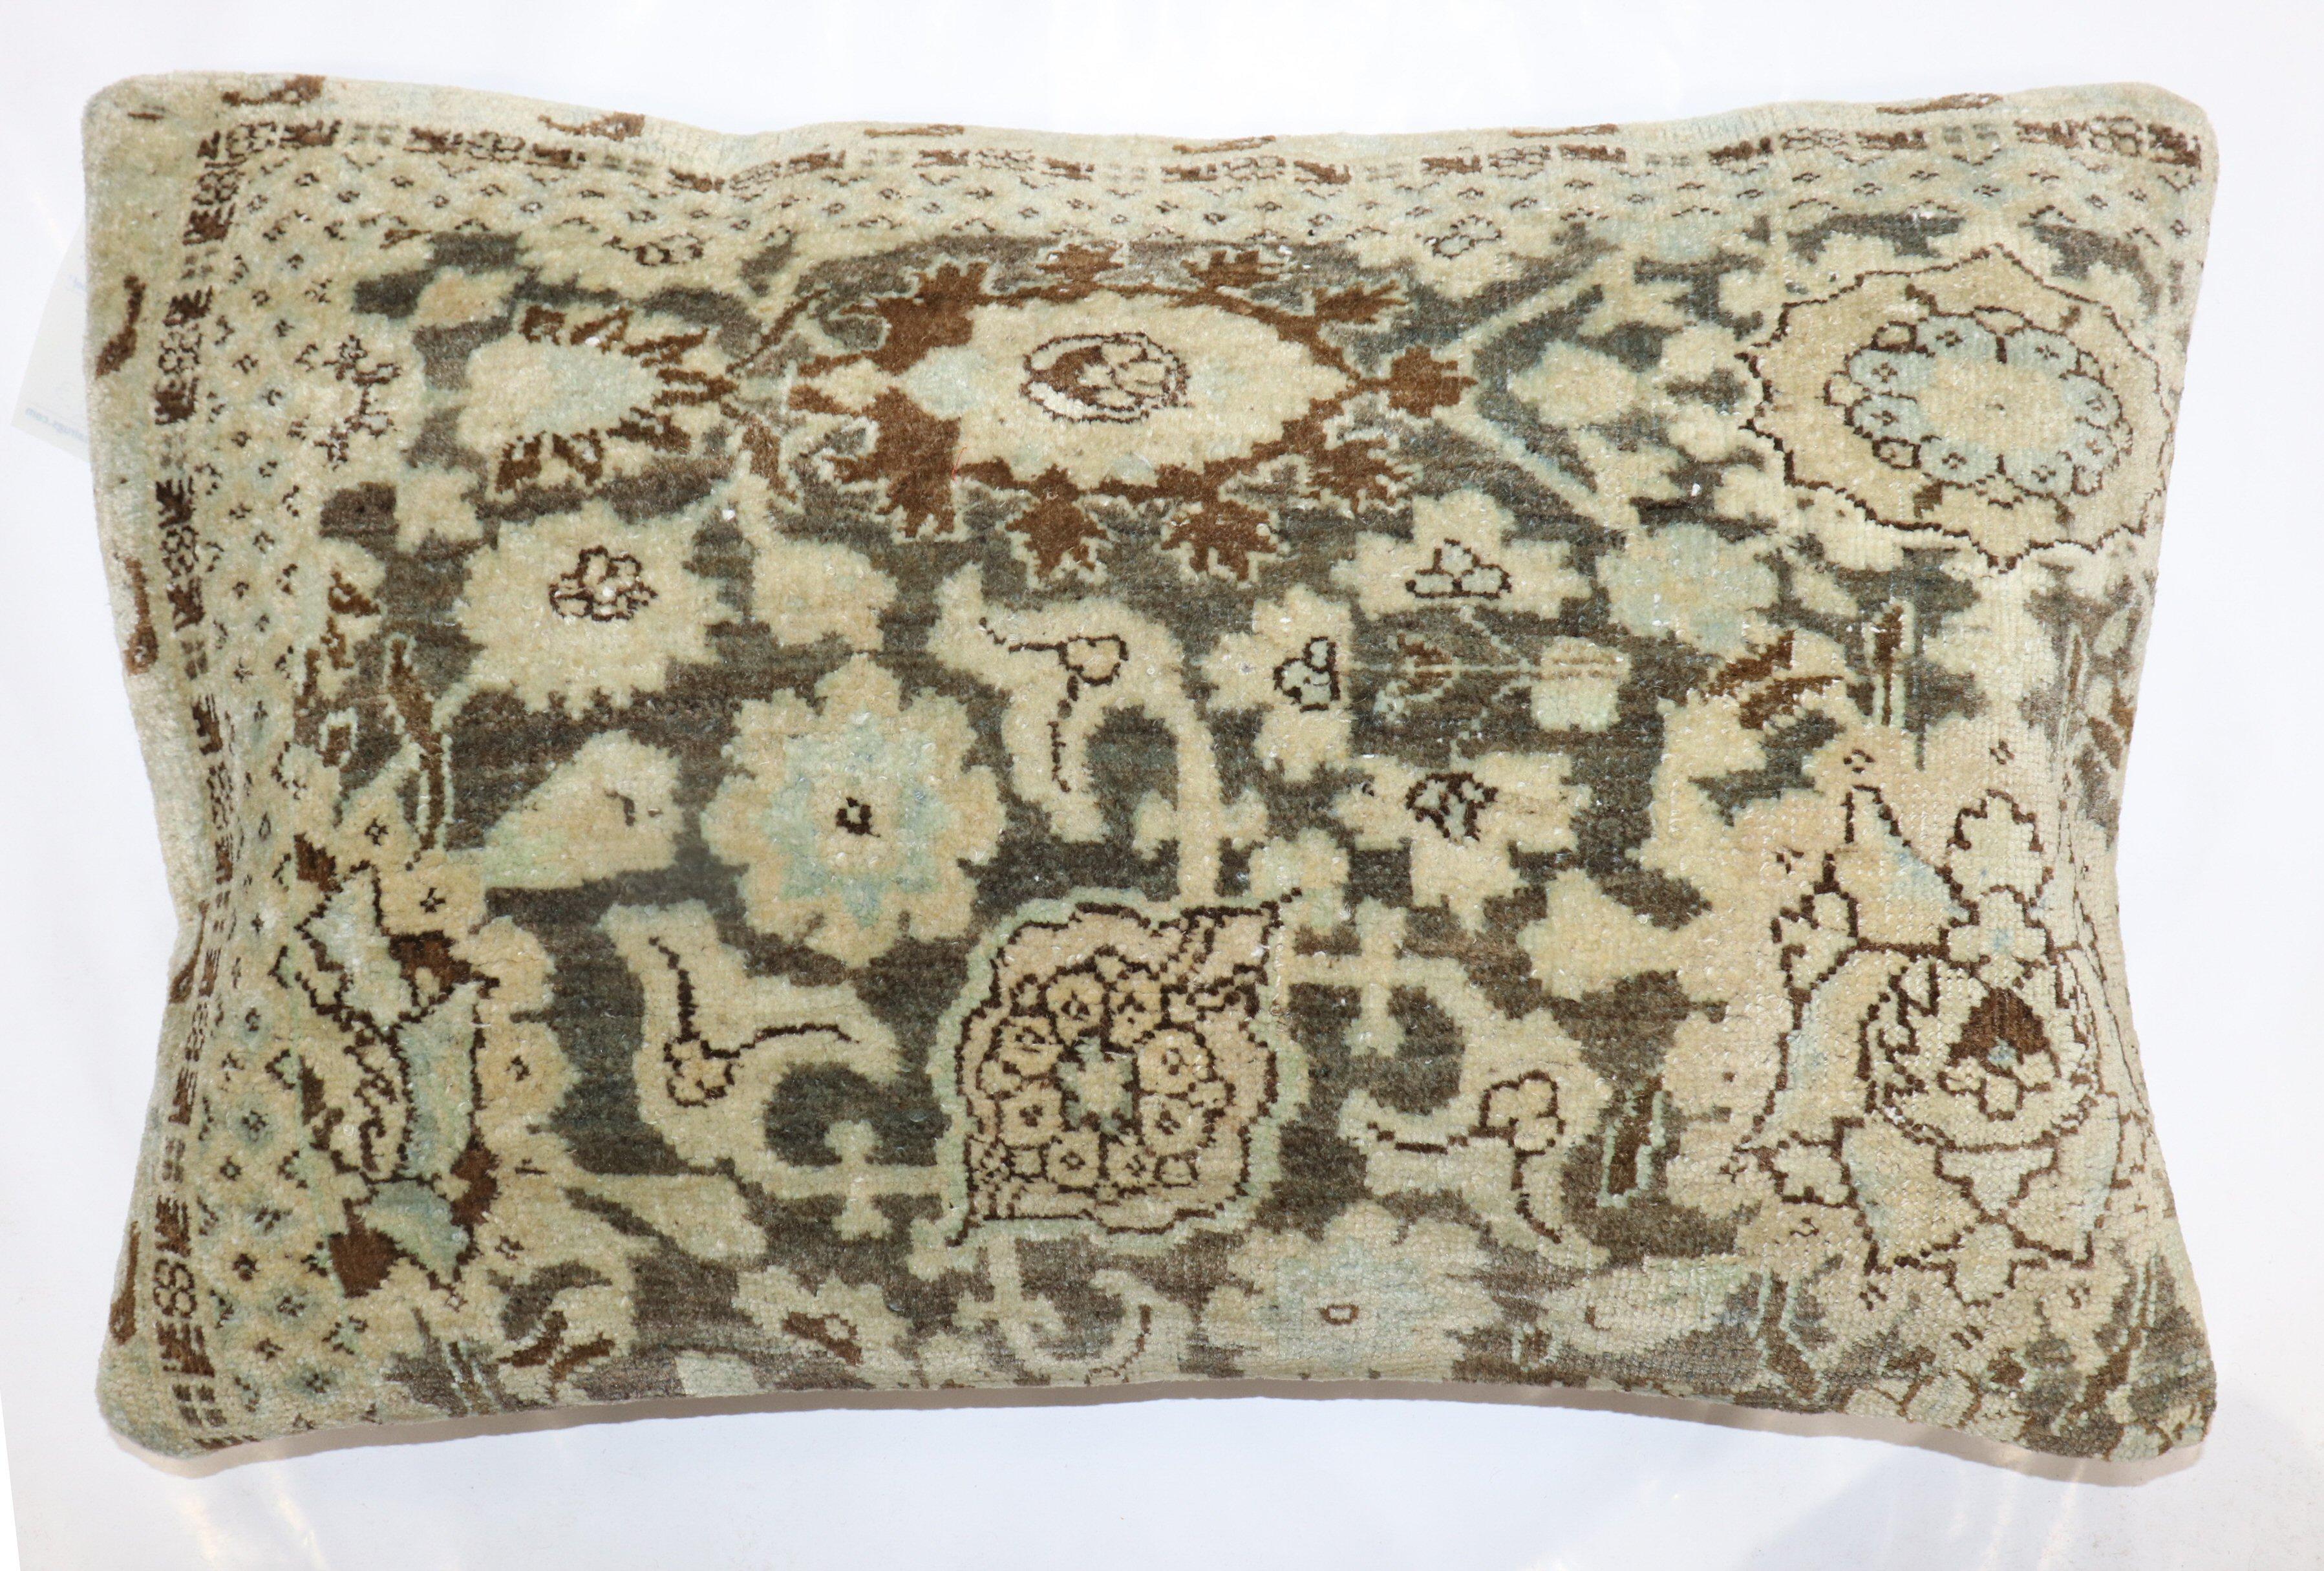 Large size pillow made from a Persian Lilihan rug. zipper closure and poly-fill insert provided.

Measures: 17'' x 27''.